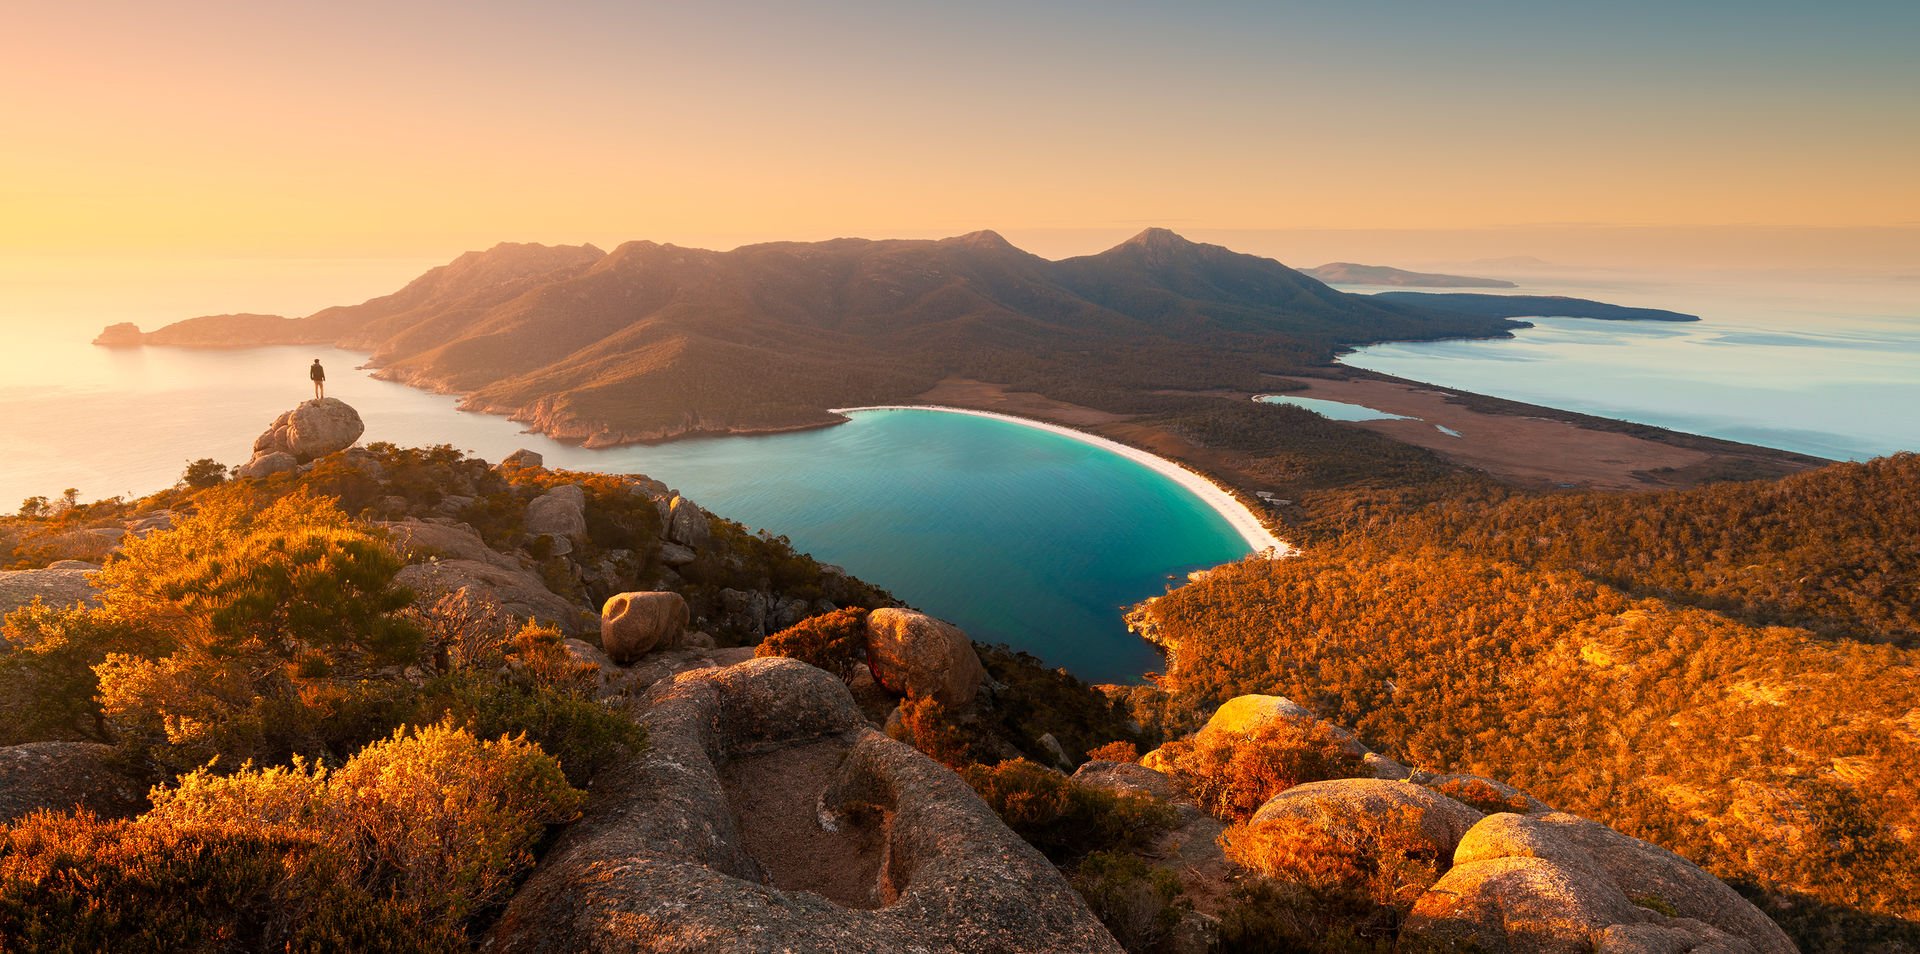 Wineglass Bay, tourist on a Luxury Bespoke Private tour looks over the sandy bay at sunset